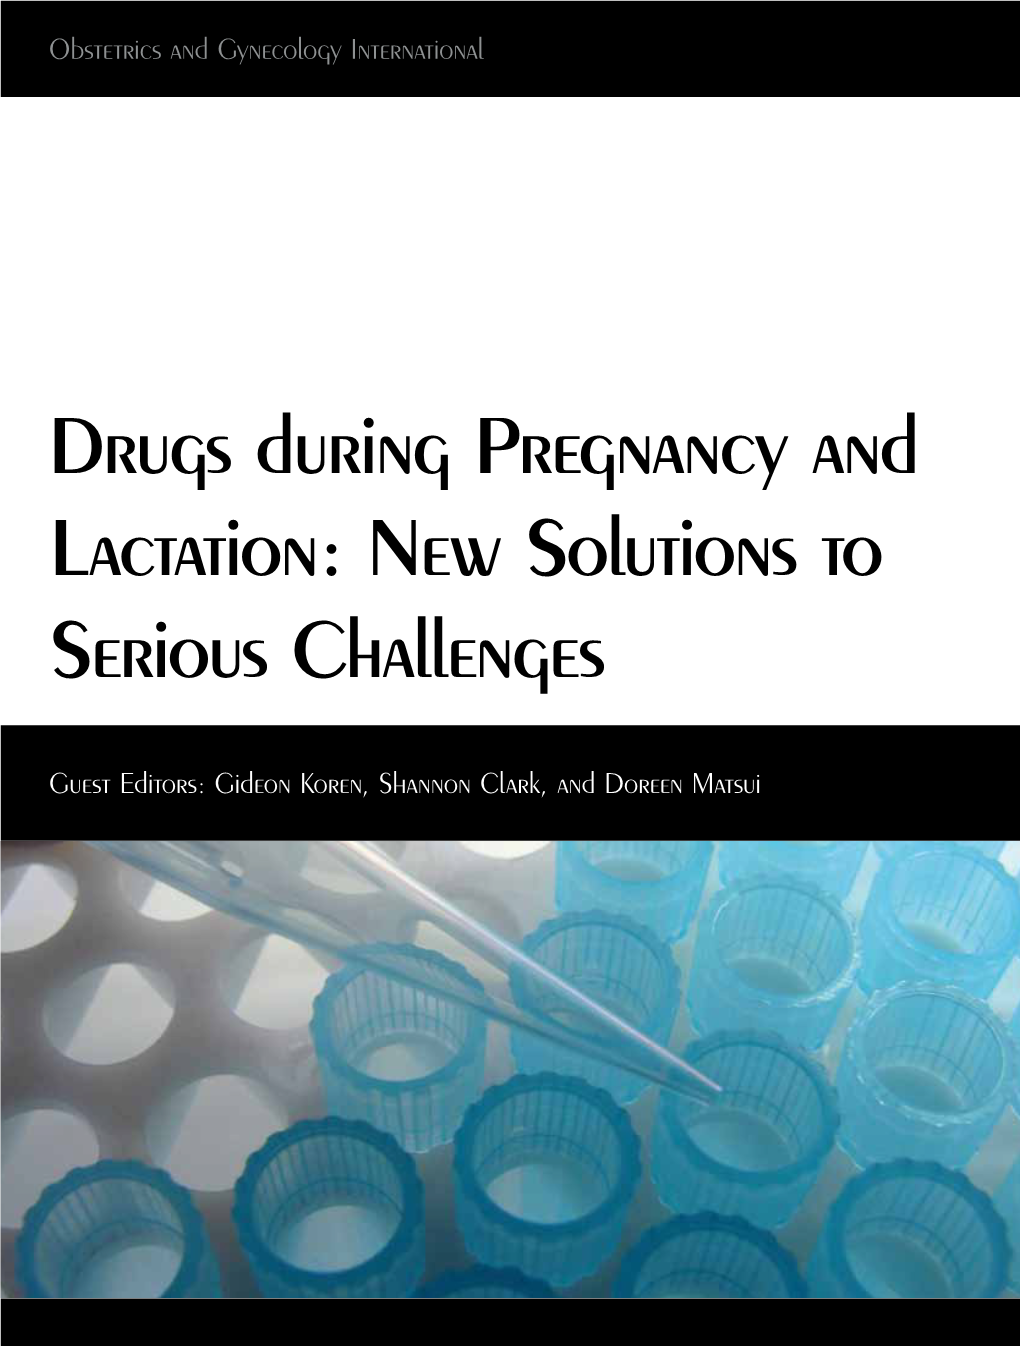 Drugs During Pregnancy and Lactation: New Solutions to Serious Challenges